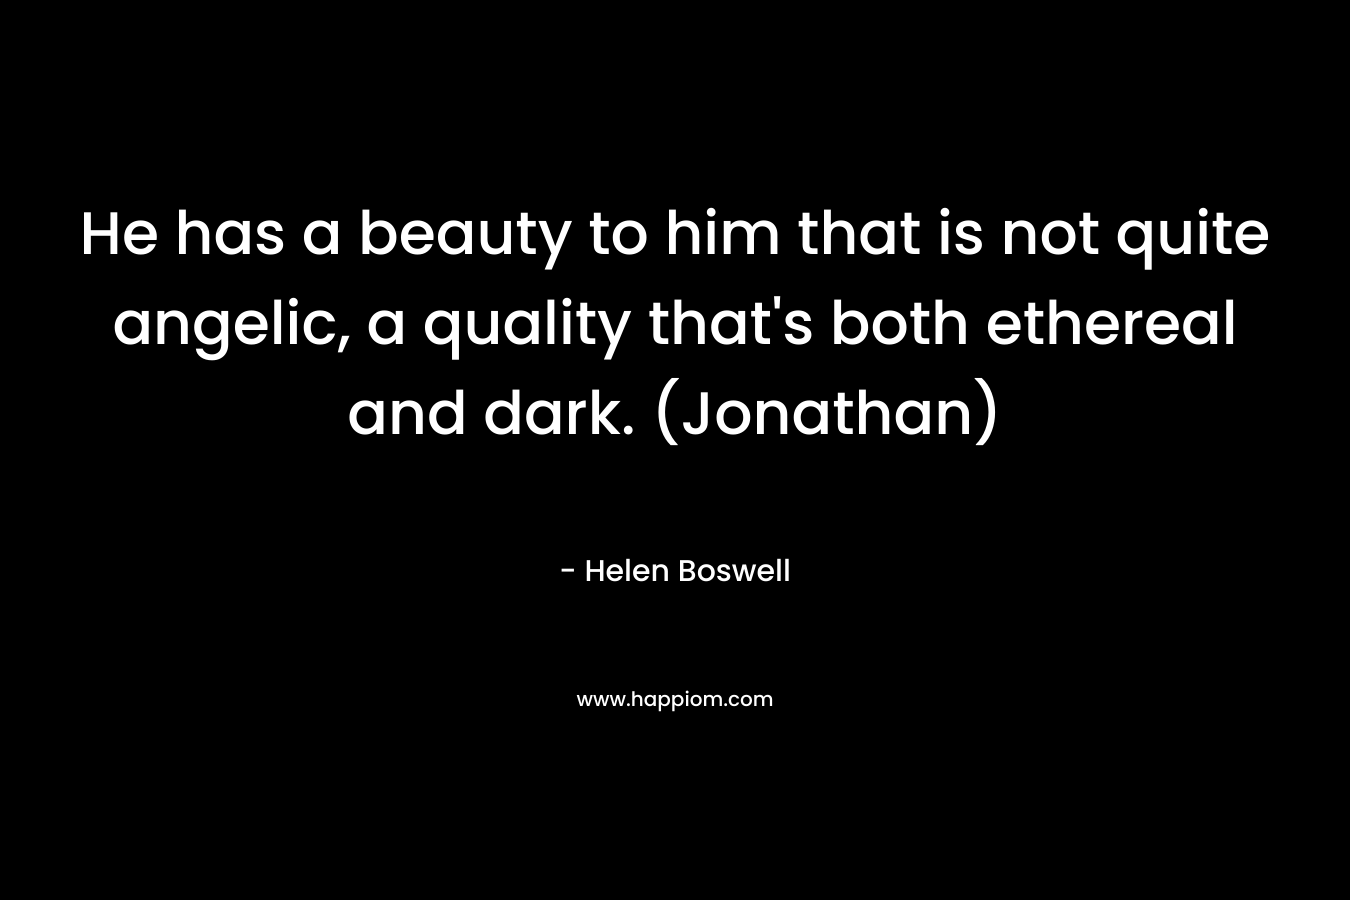 He has a beauty to him that is not quite angelic, a quality that’s both ethereal and dark. (Jonathan) – Helen Boswell